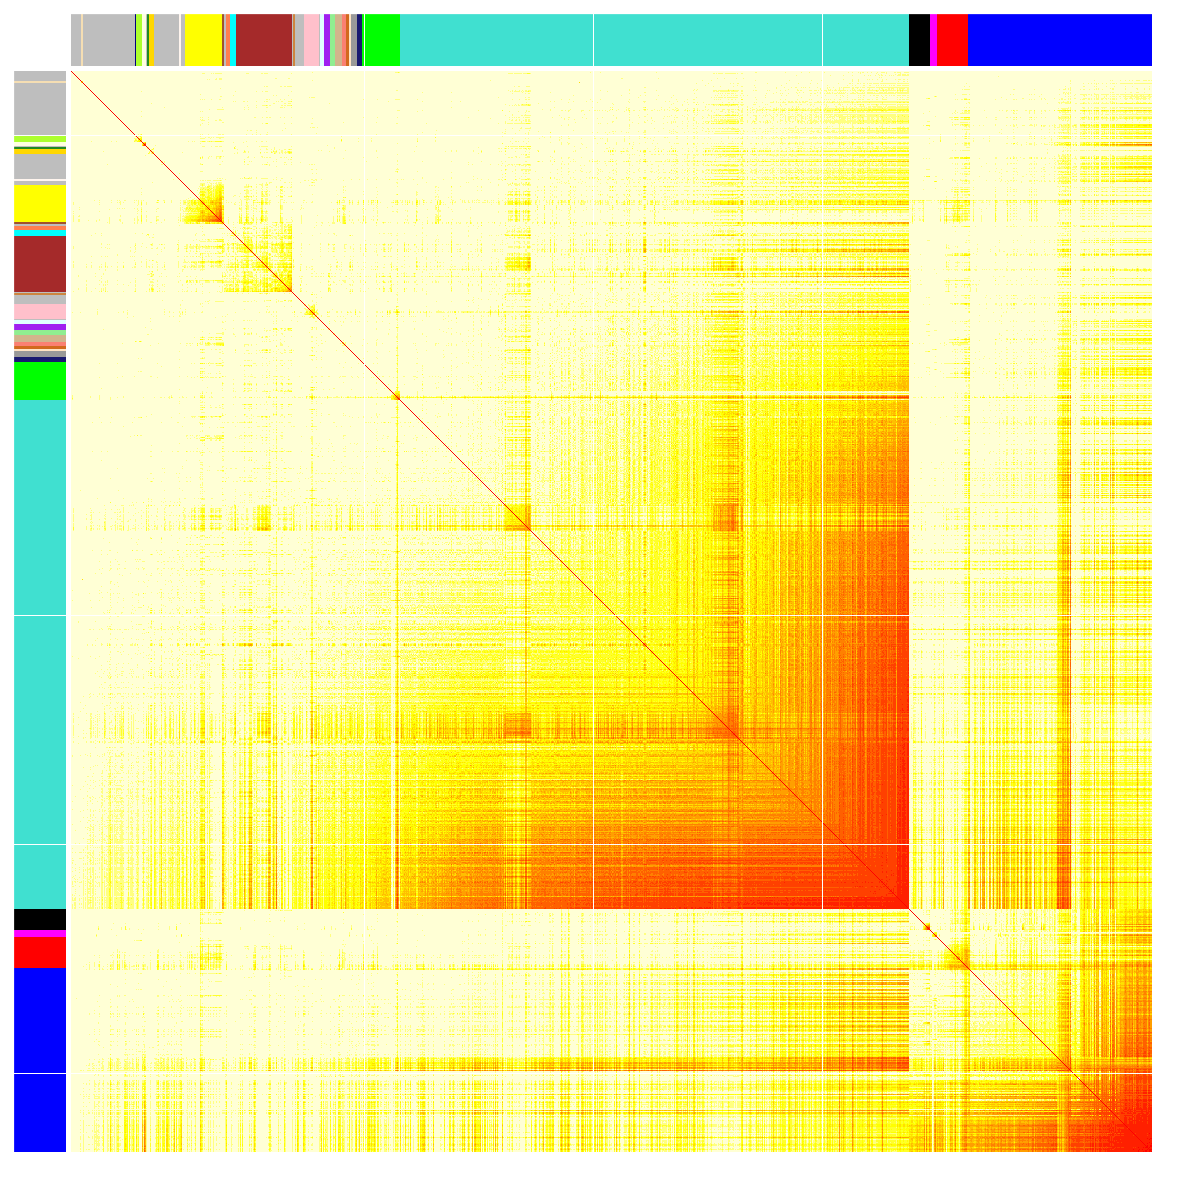 yxdefeat-qnorm_group_RESIL_TR-adjusted_imgHeatmap.png